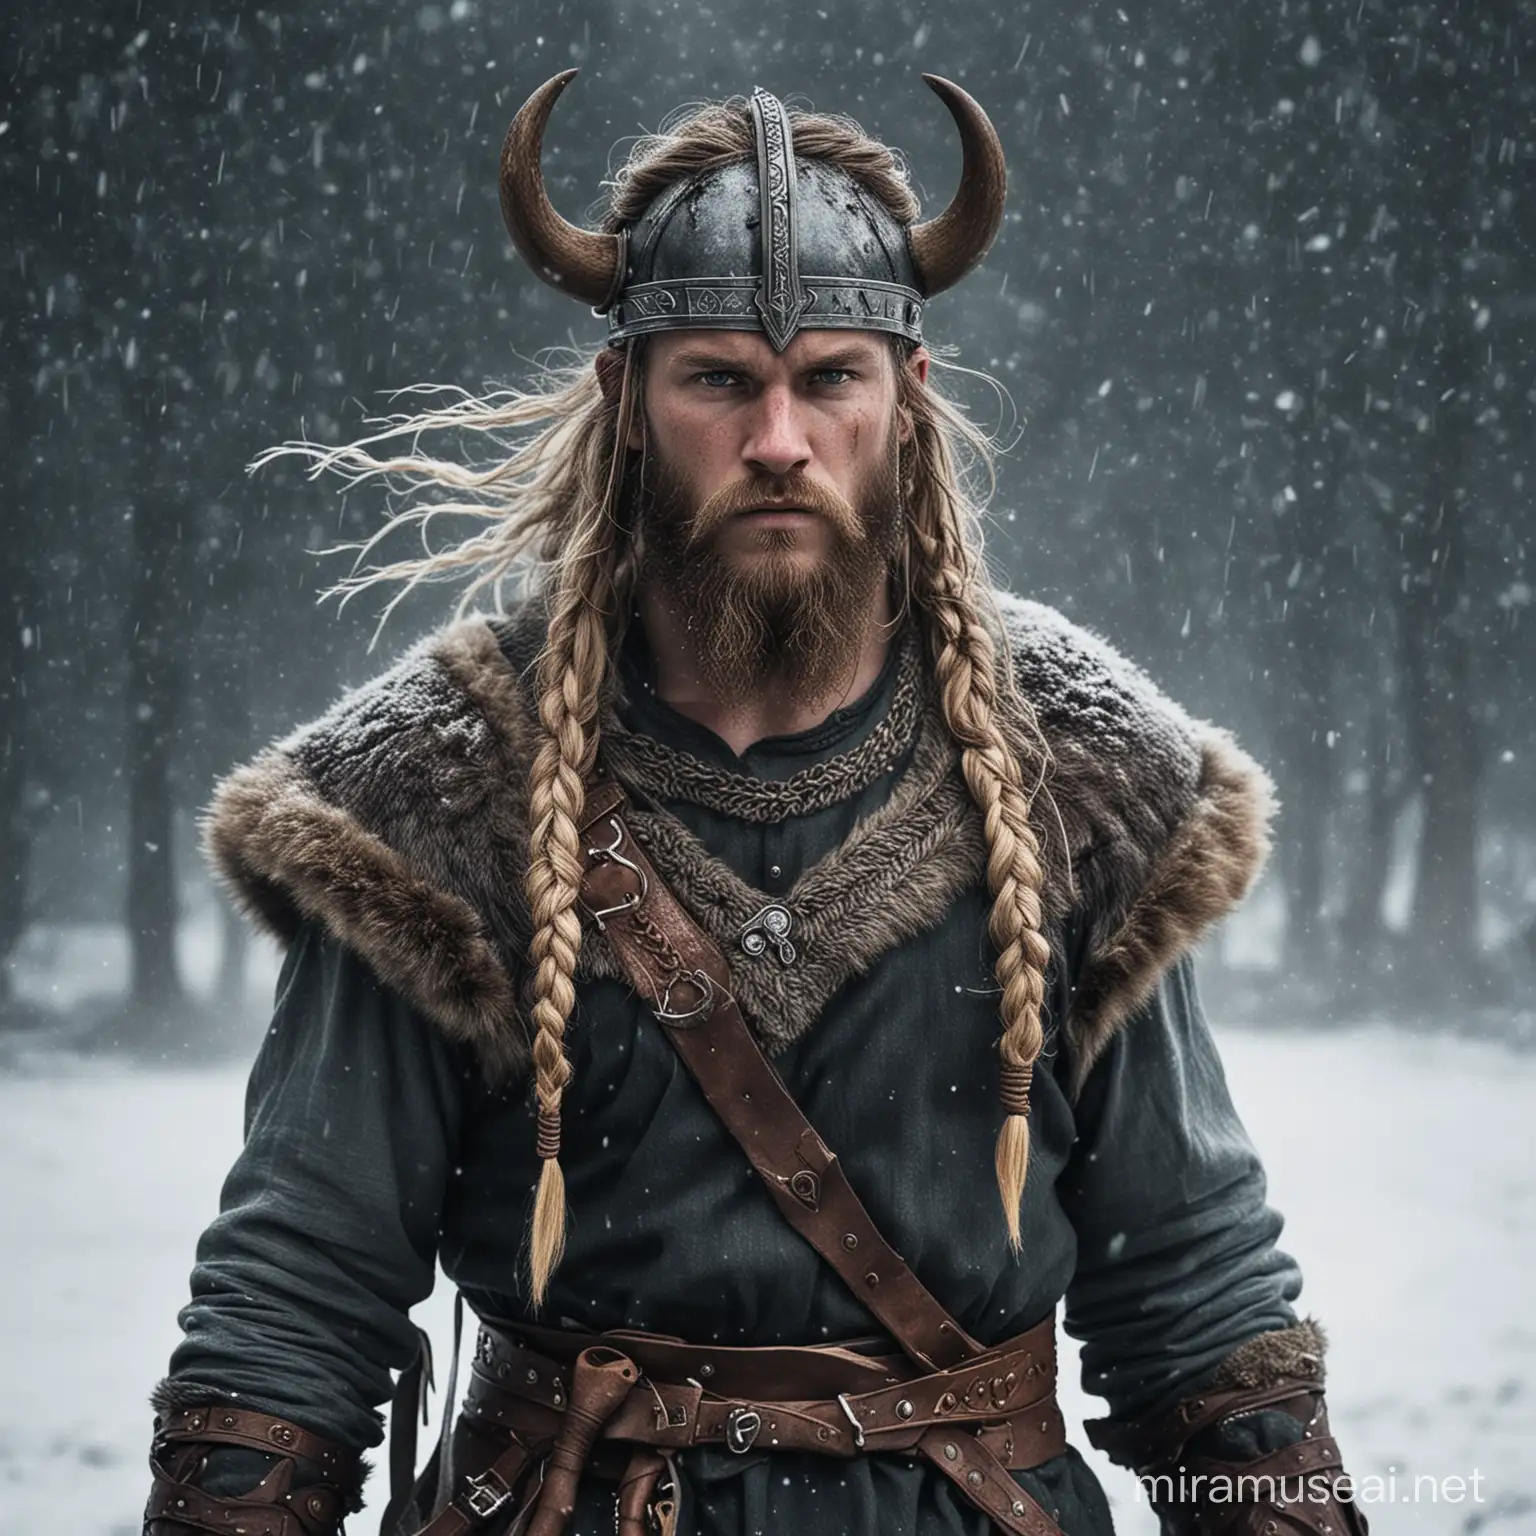 Imagine yourself as a Viking warrior in the midst of a blizzard. Describe your appearance, including your weapon of choice and any unique characteristics